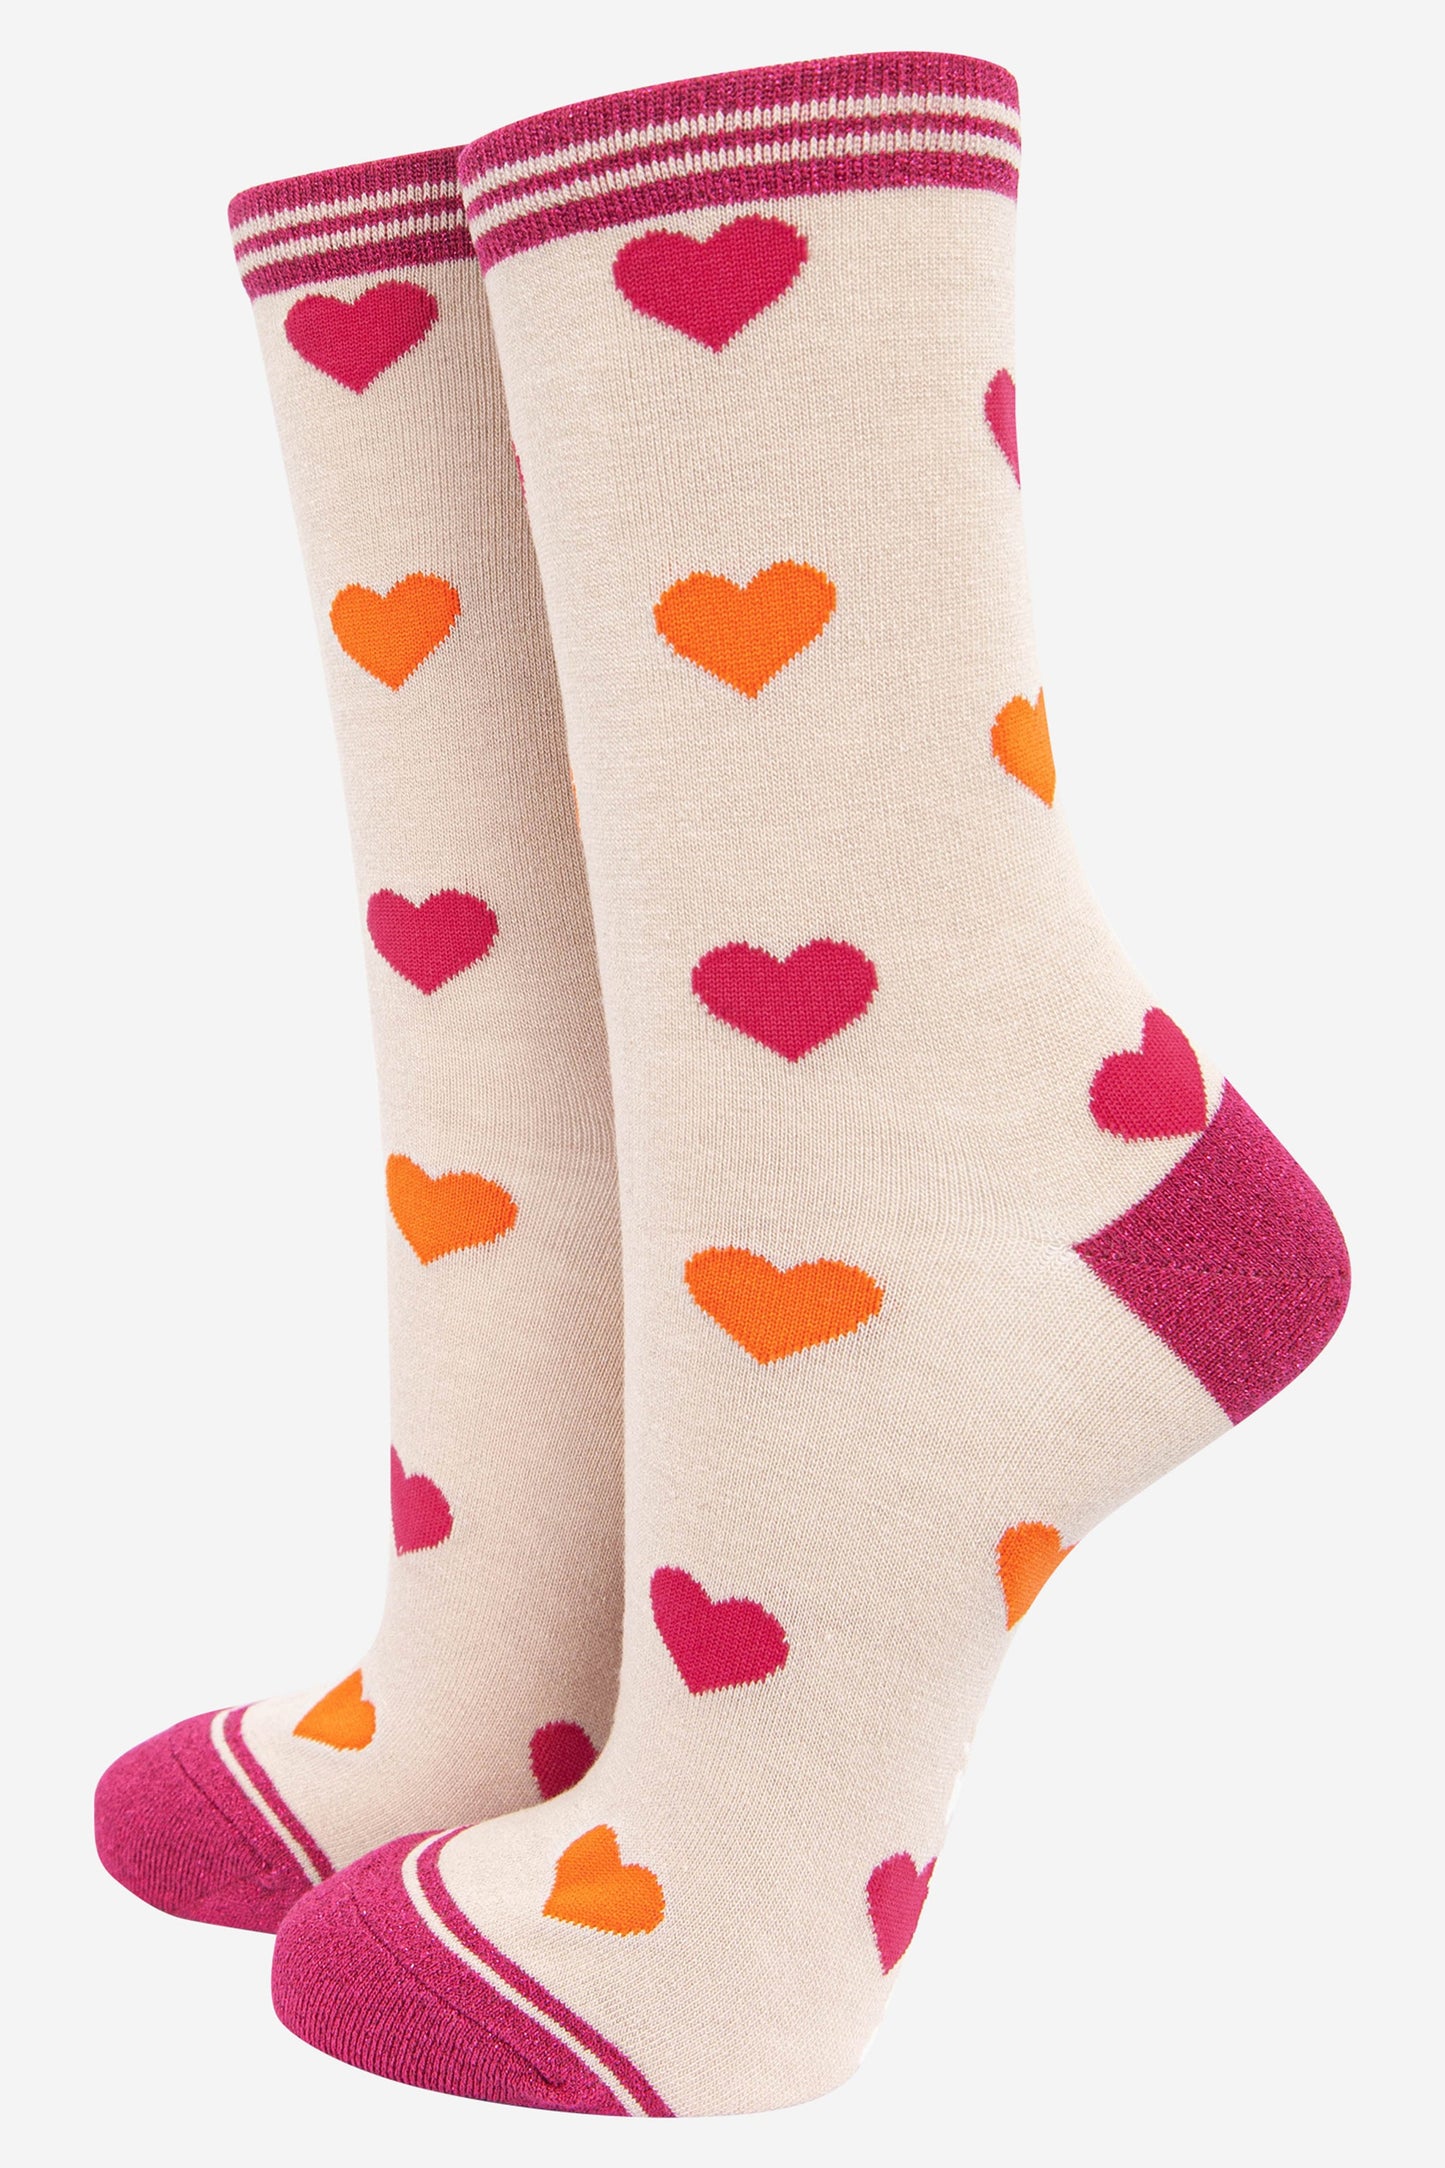 cream ankle socks with a glittery pink heel, toe and cuff with an all over pattern of pink and orange love hearts